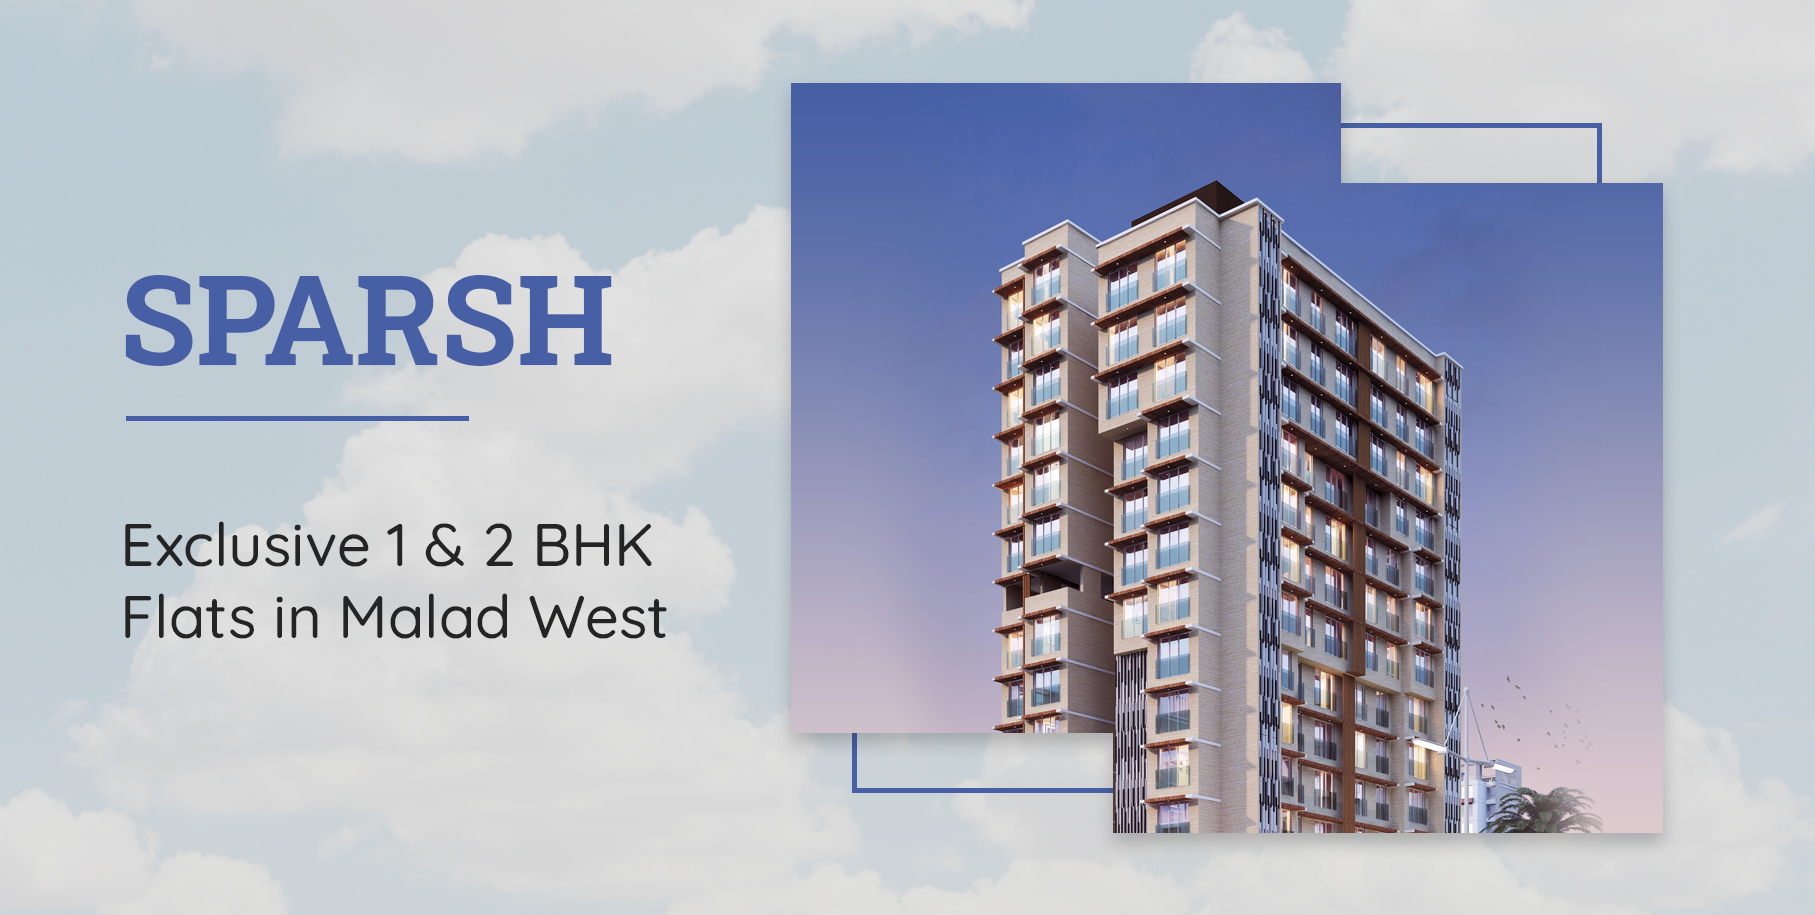 Sparsh – Exclusive 1 & 2 BHK Flats in Malad West